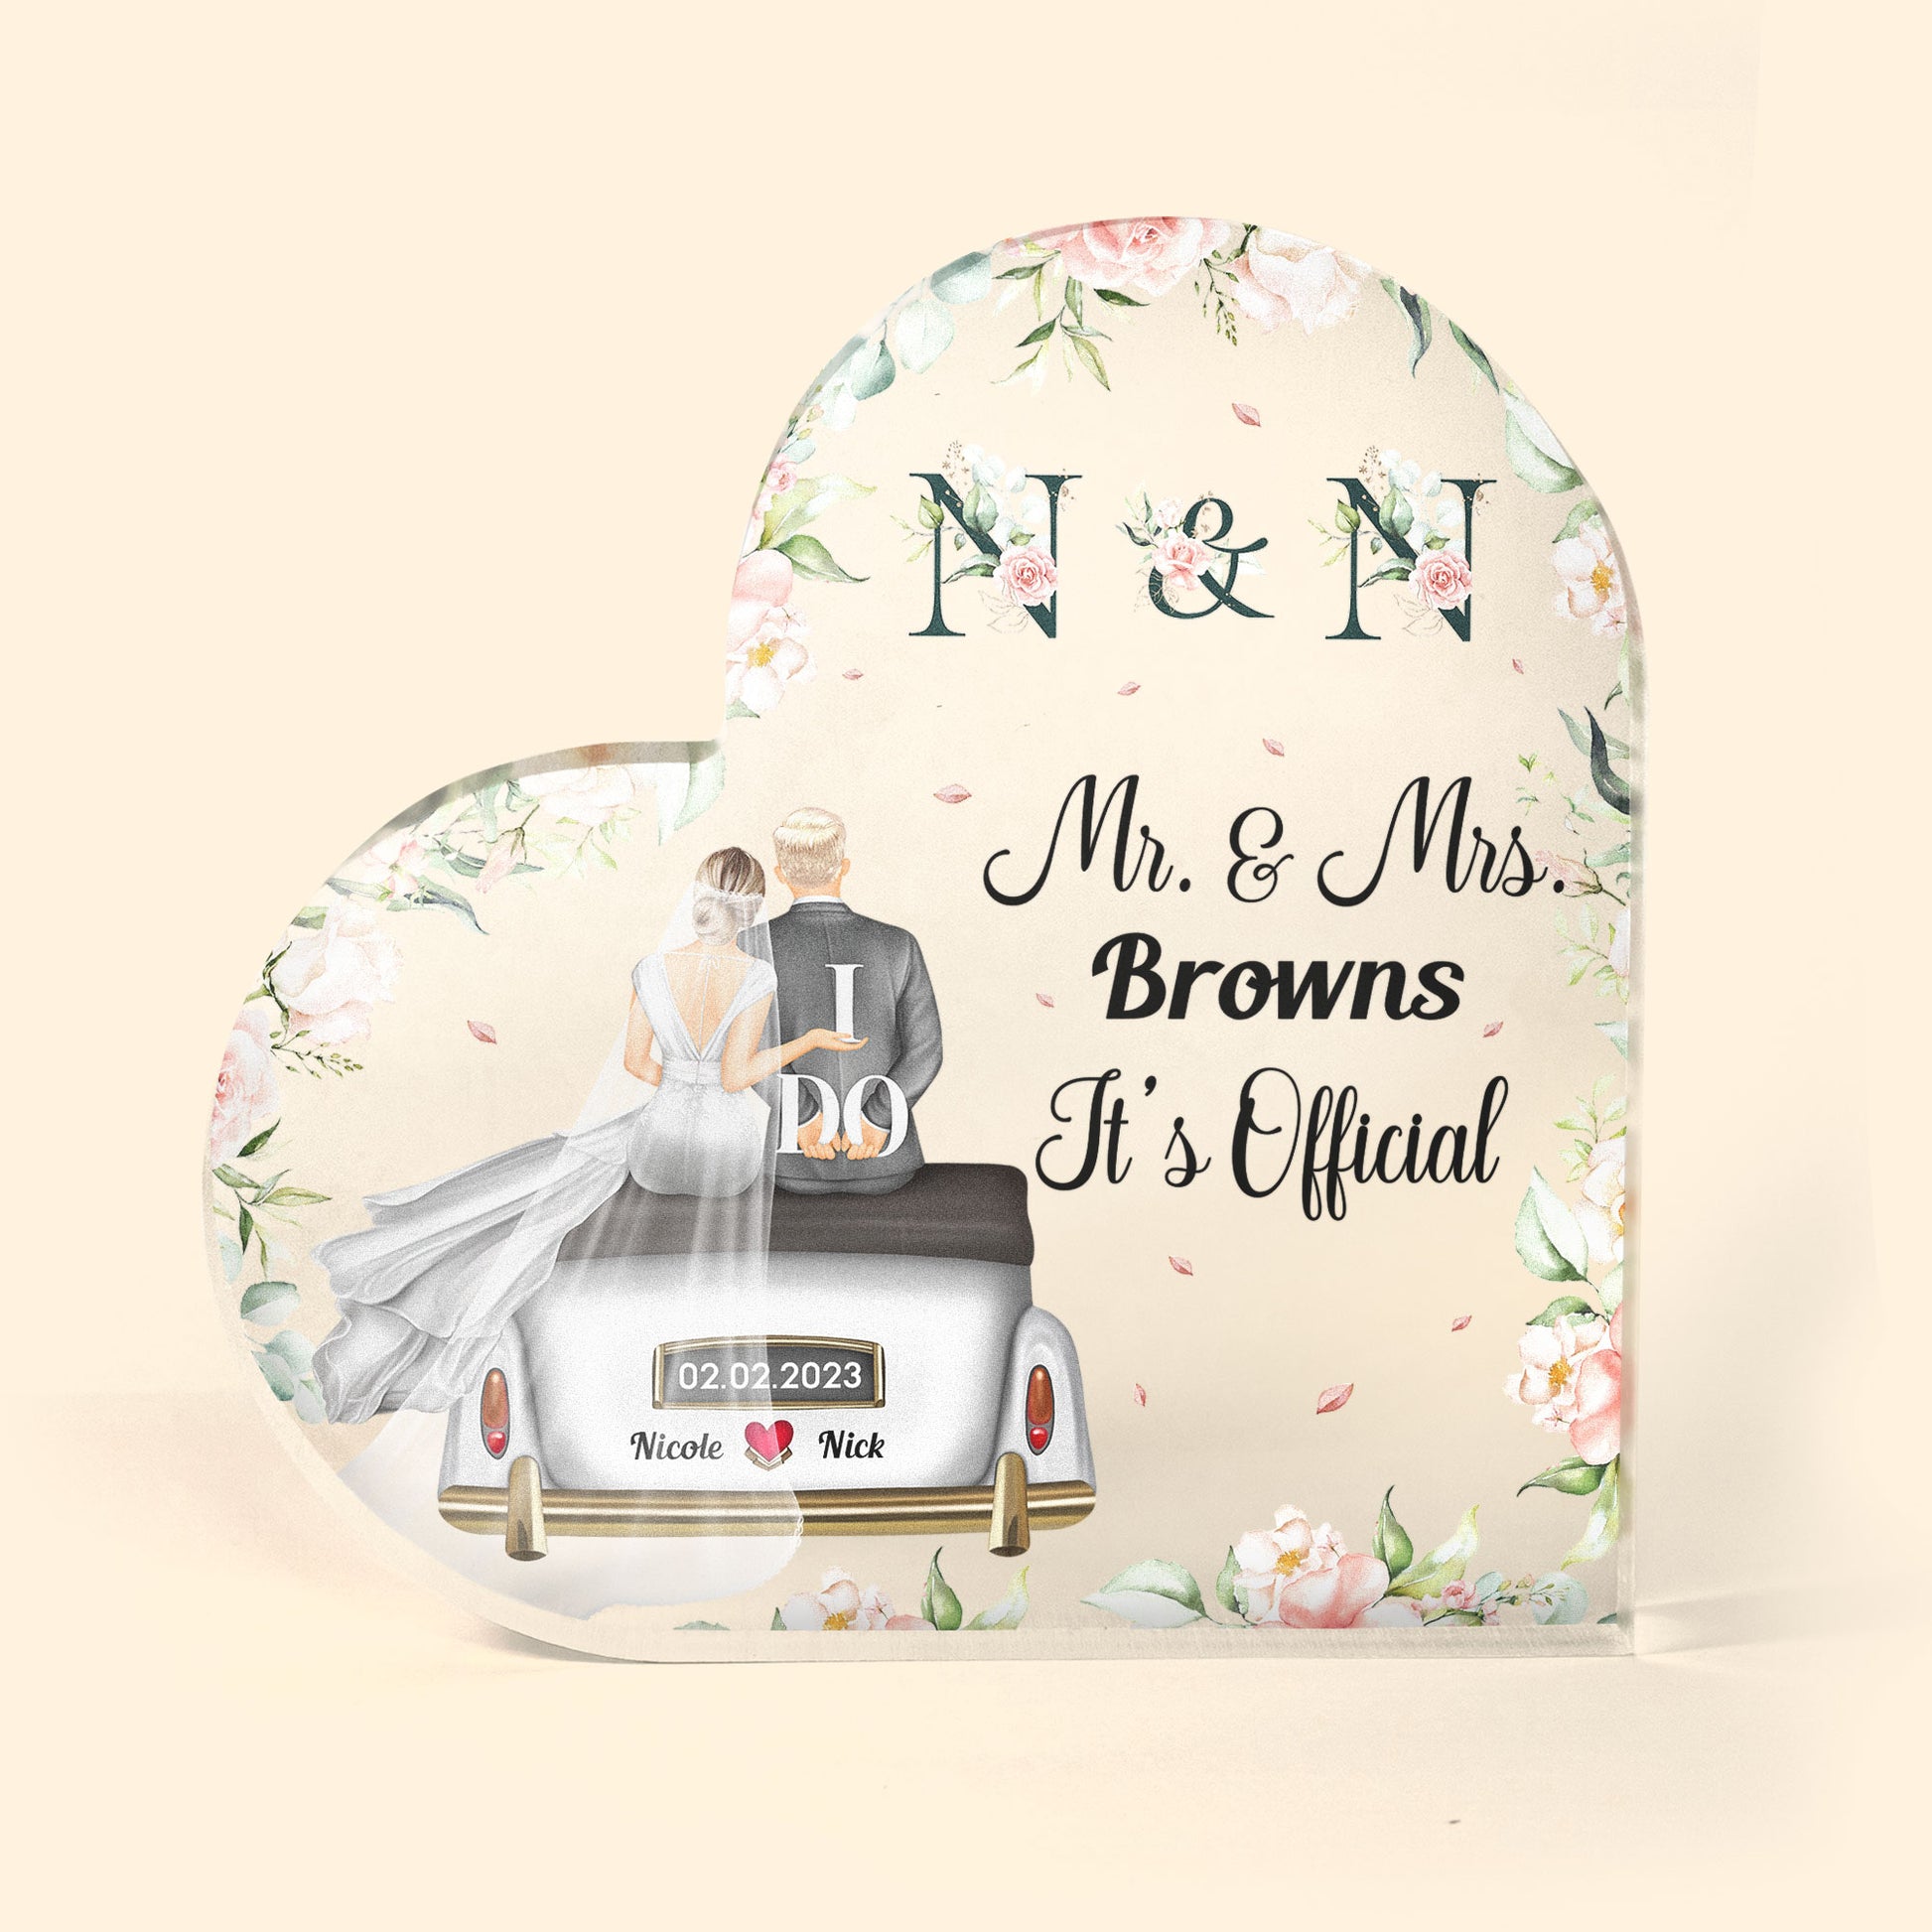 It's Official Mr. & Mrs. - Personalized Heart Shaped Acrylic Plaque - Wedding, Anniversary, Loving Gift For Newly Wed Couples, Hubby & Wifey, Husband & Wife